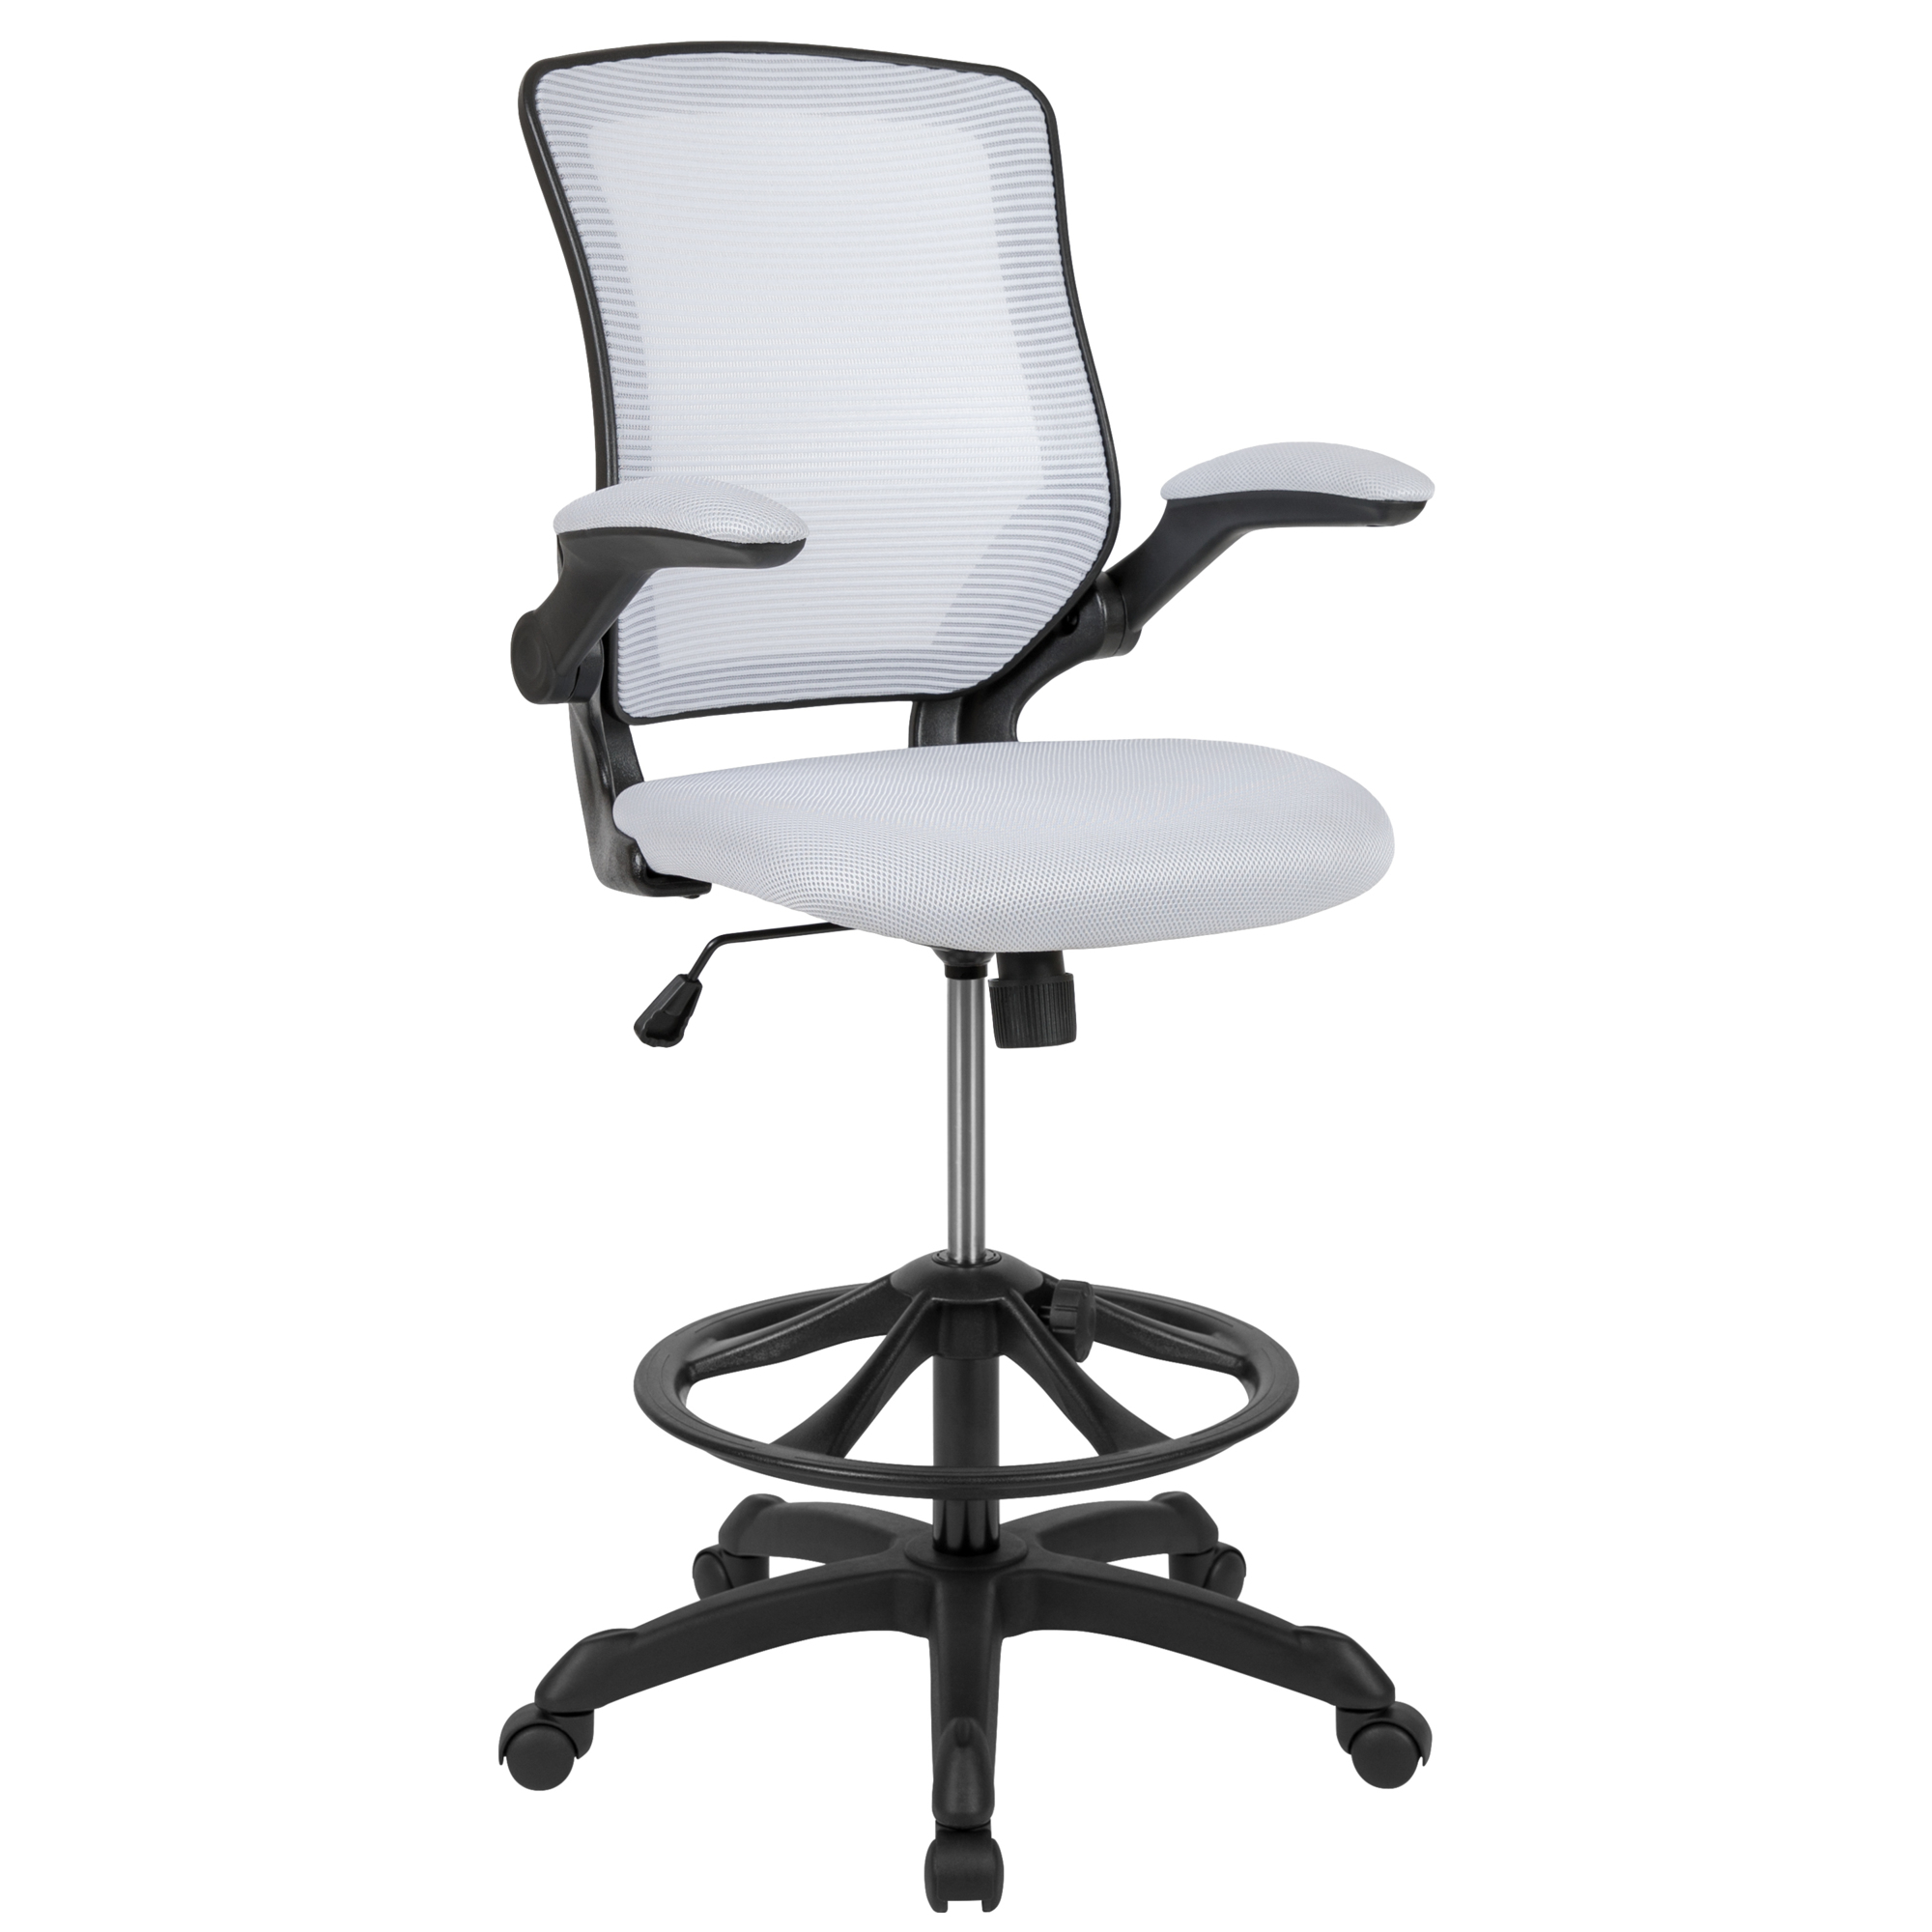 Flash Furniture, Mid-Back White Mesh Ergonomic Drafting Chair, Primary Color White, Included (qty.) 1 Model BLZP8805DWH